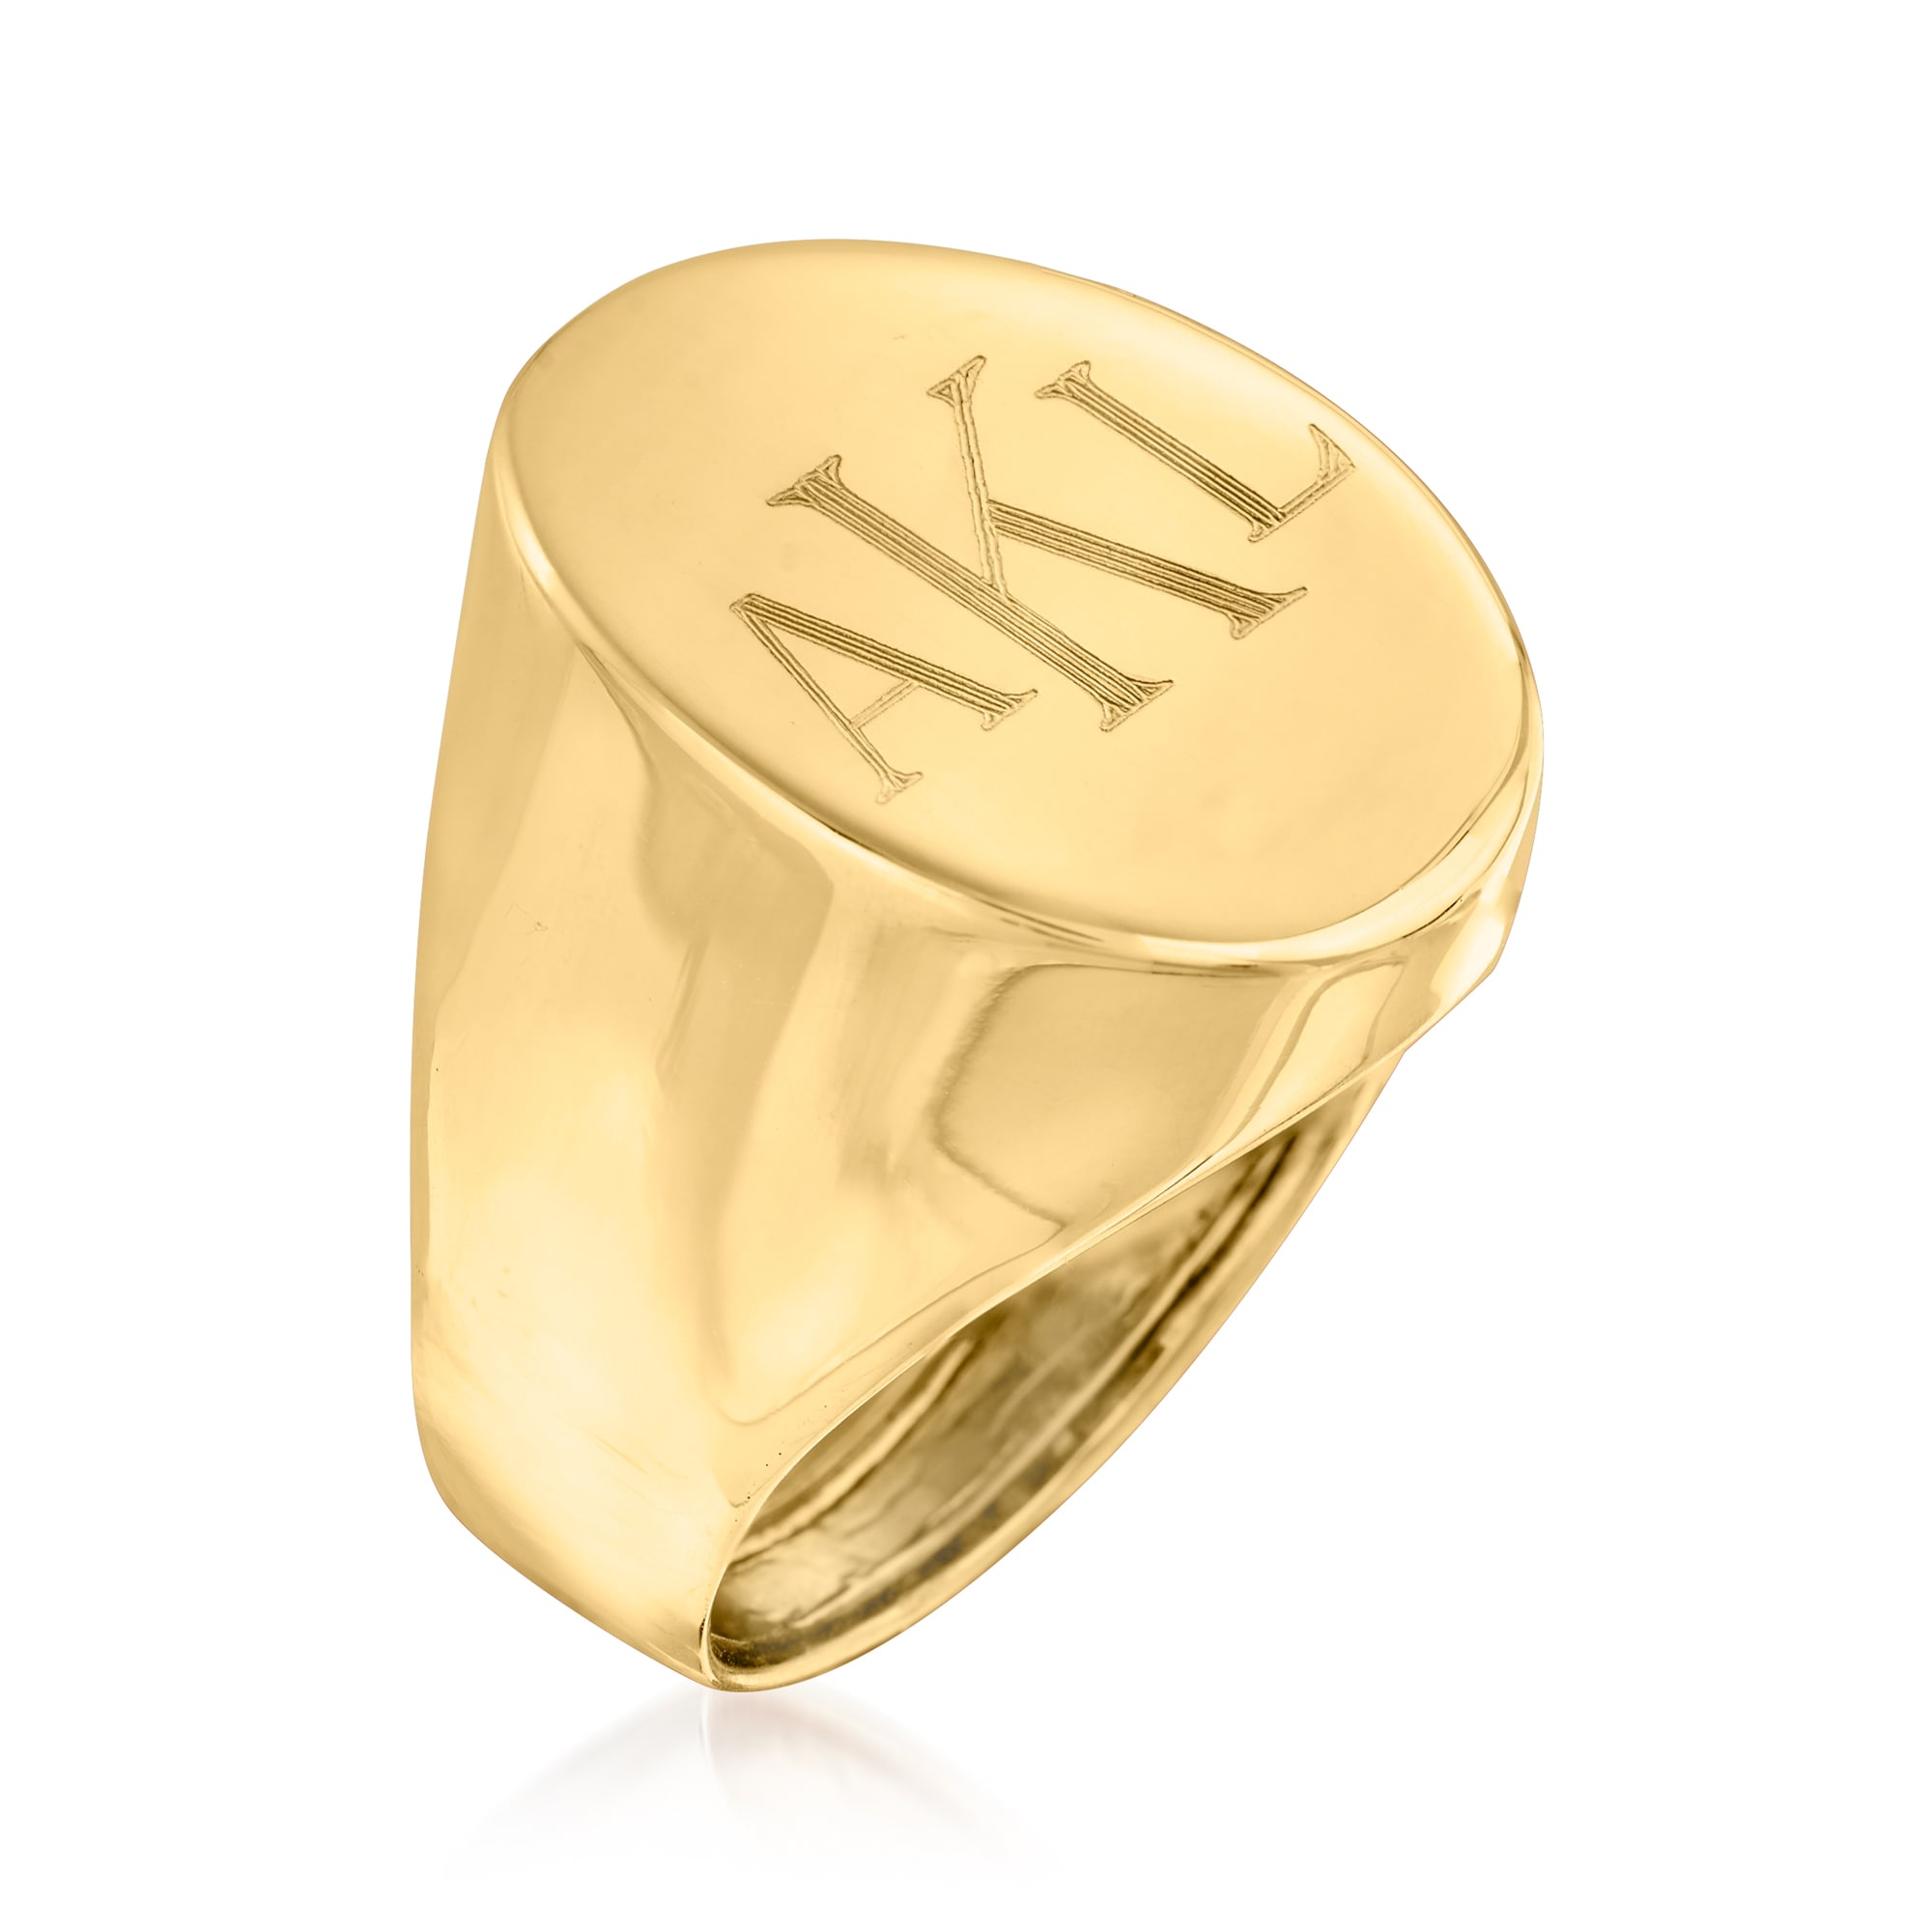 Ross-Simons - 24kt Gold Over Sterling Personalized Monogram Ring Size 7